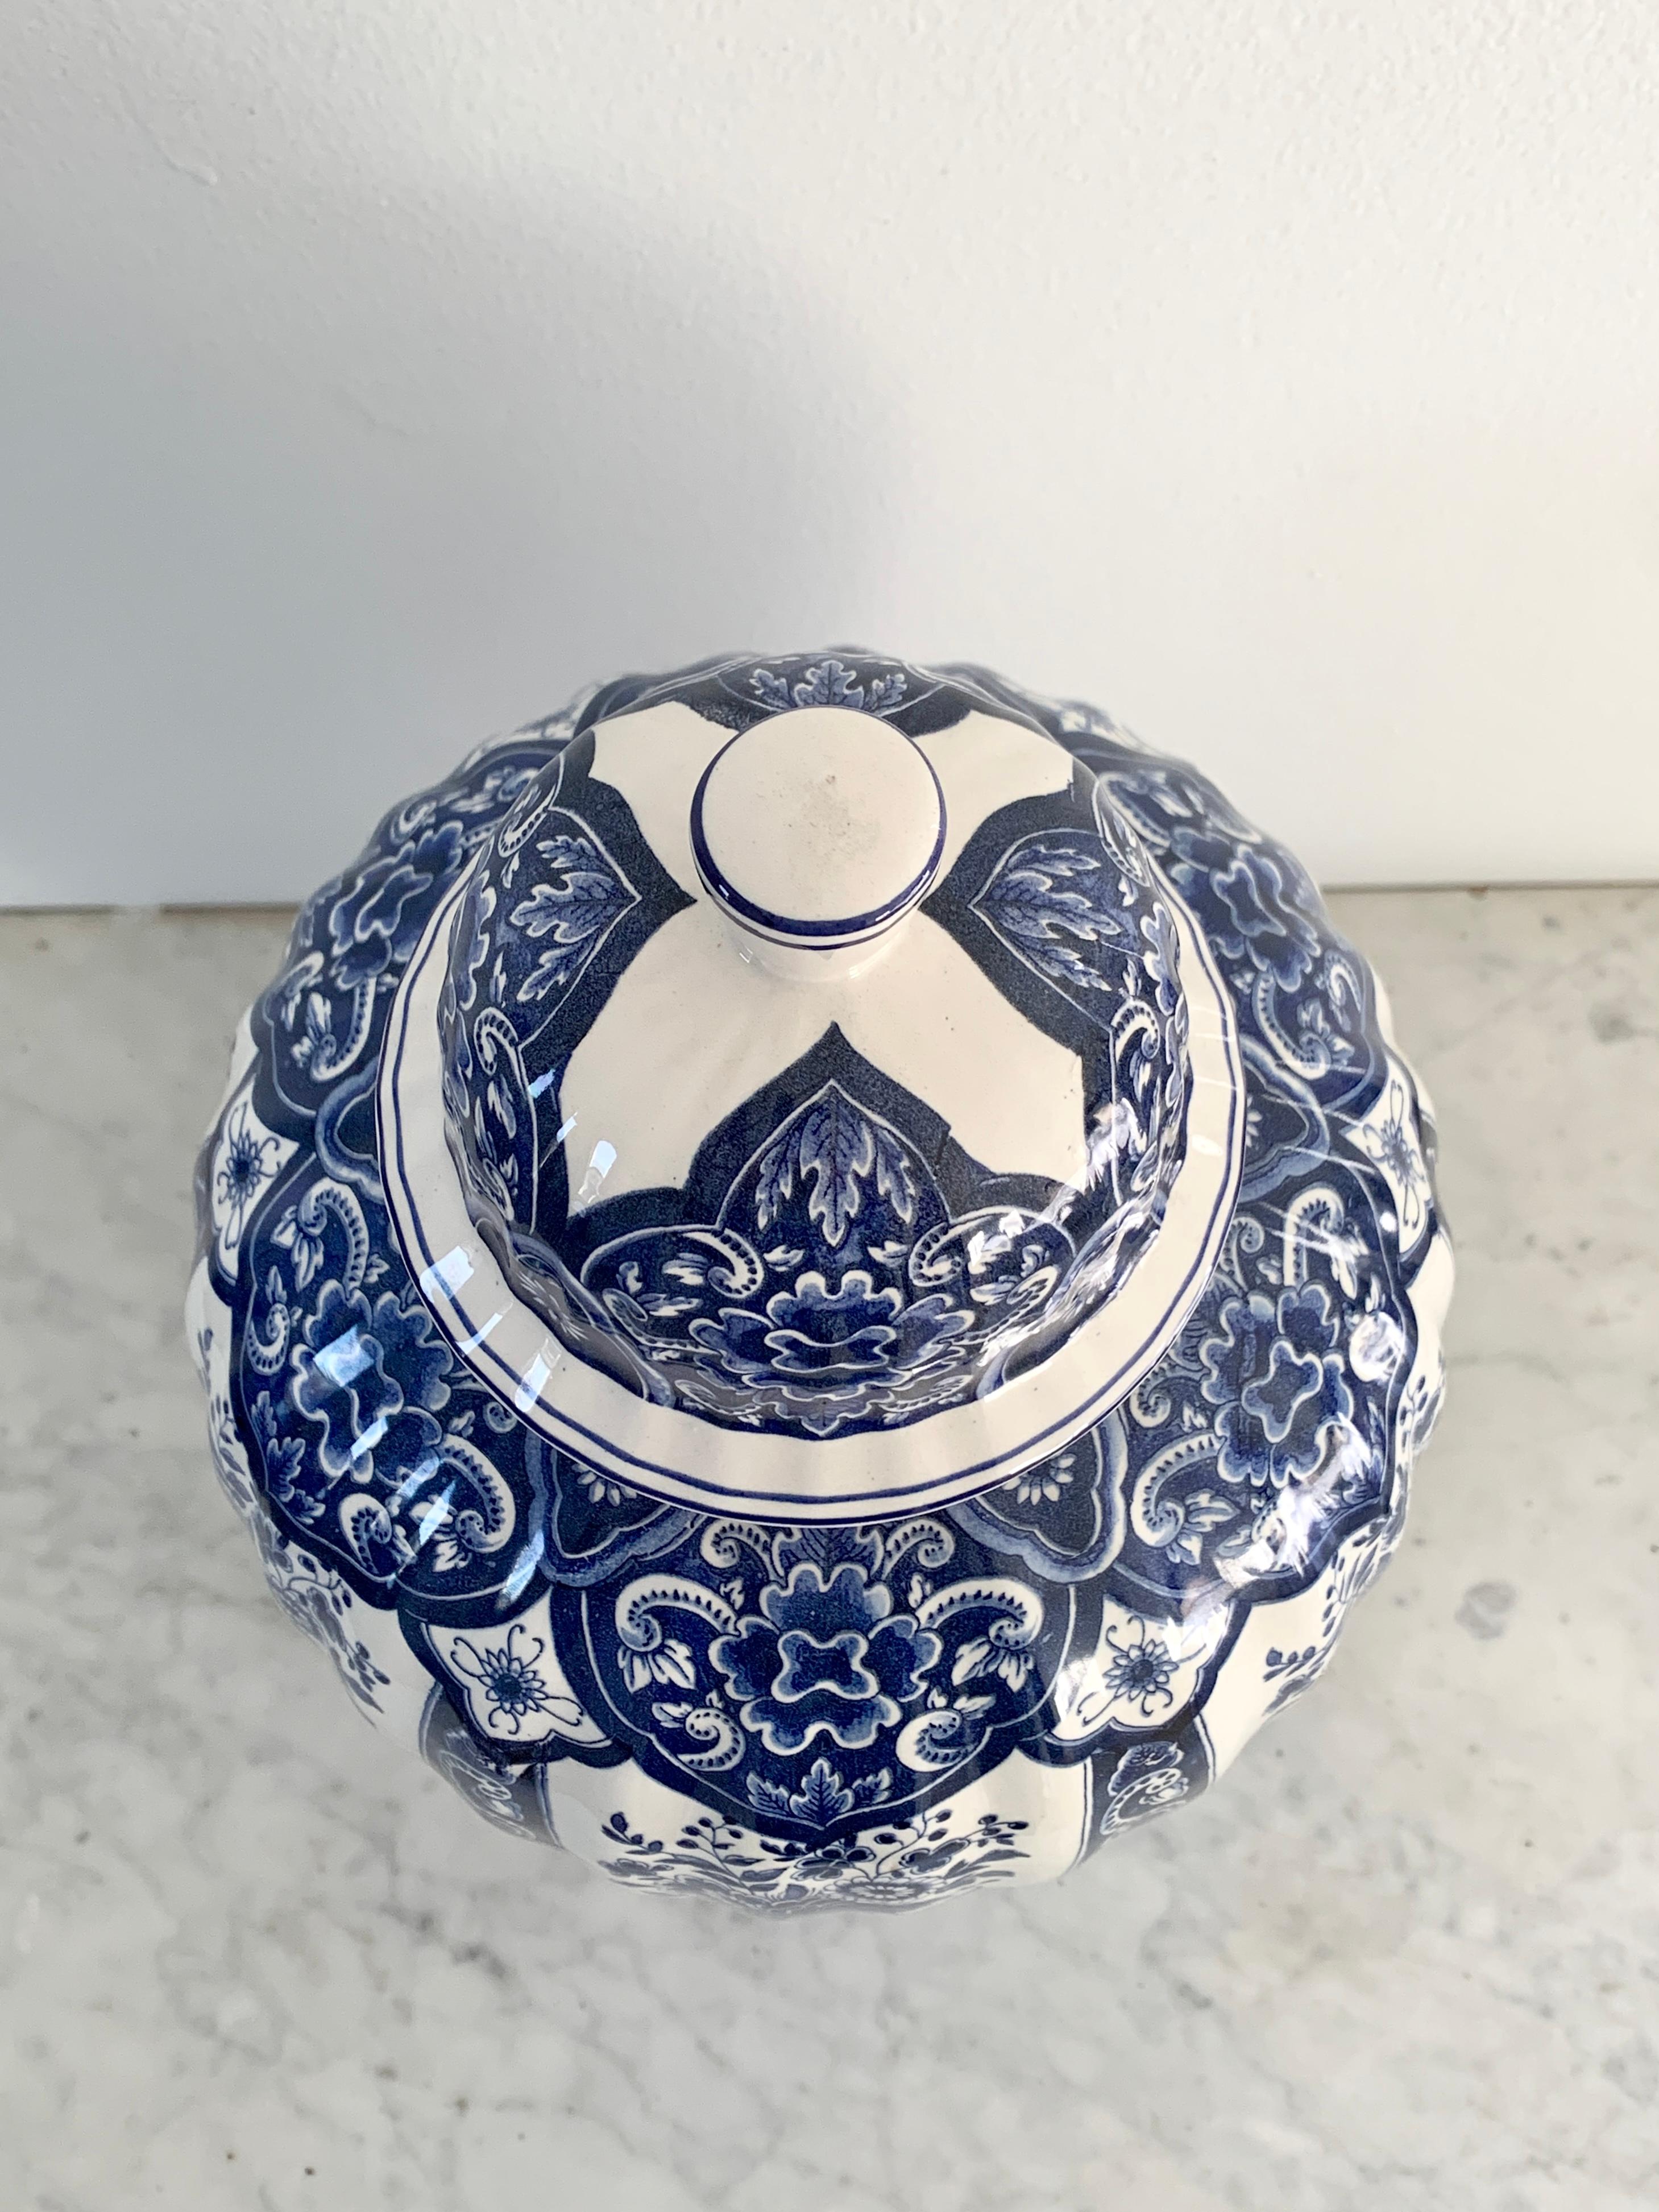 A beautiful large Chinoiserie blue and white porcelain covered ginger jar or temple jar

By Ardalt Blue Delfia

Italy, Mid-20th Century

Measures: 9